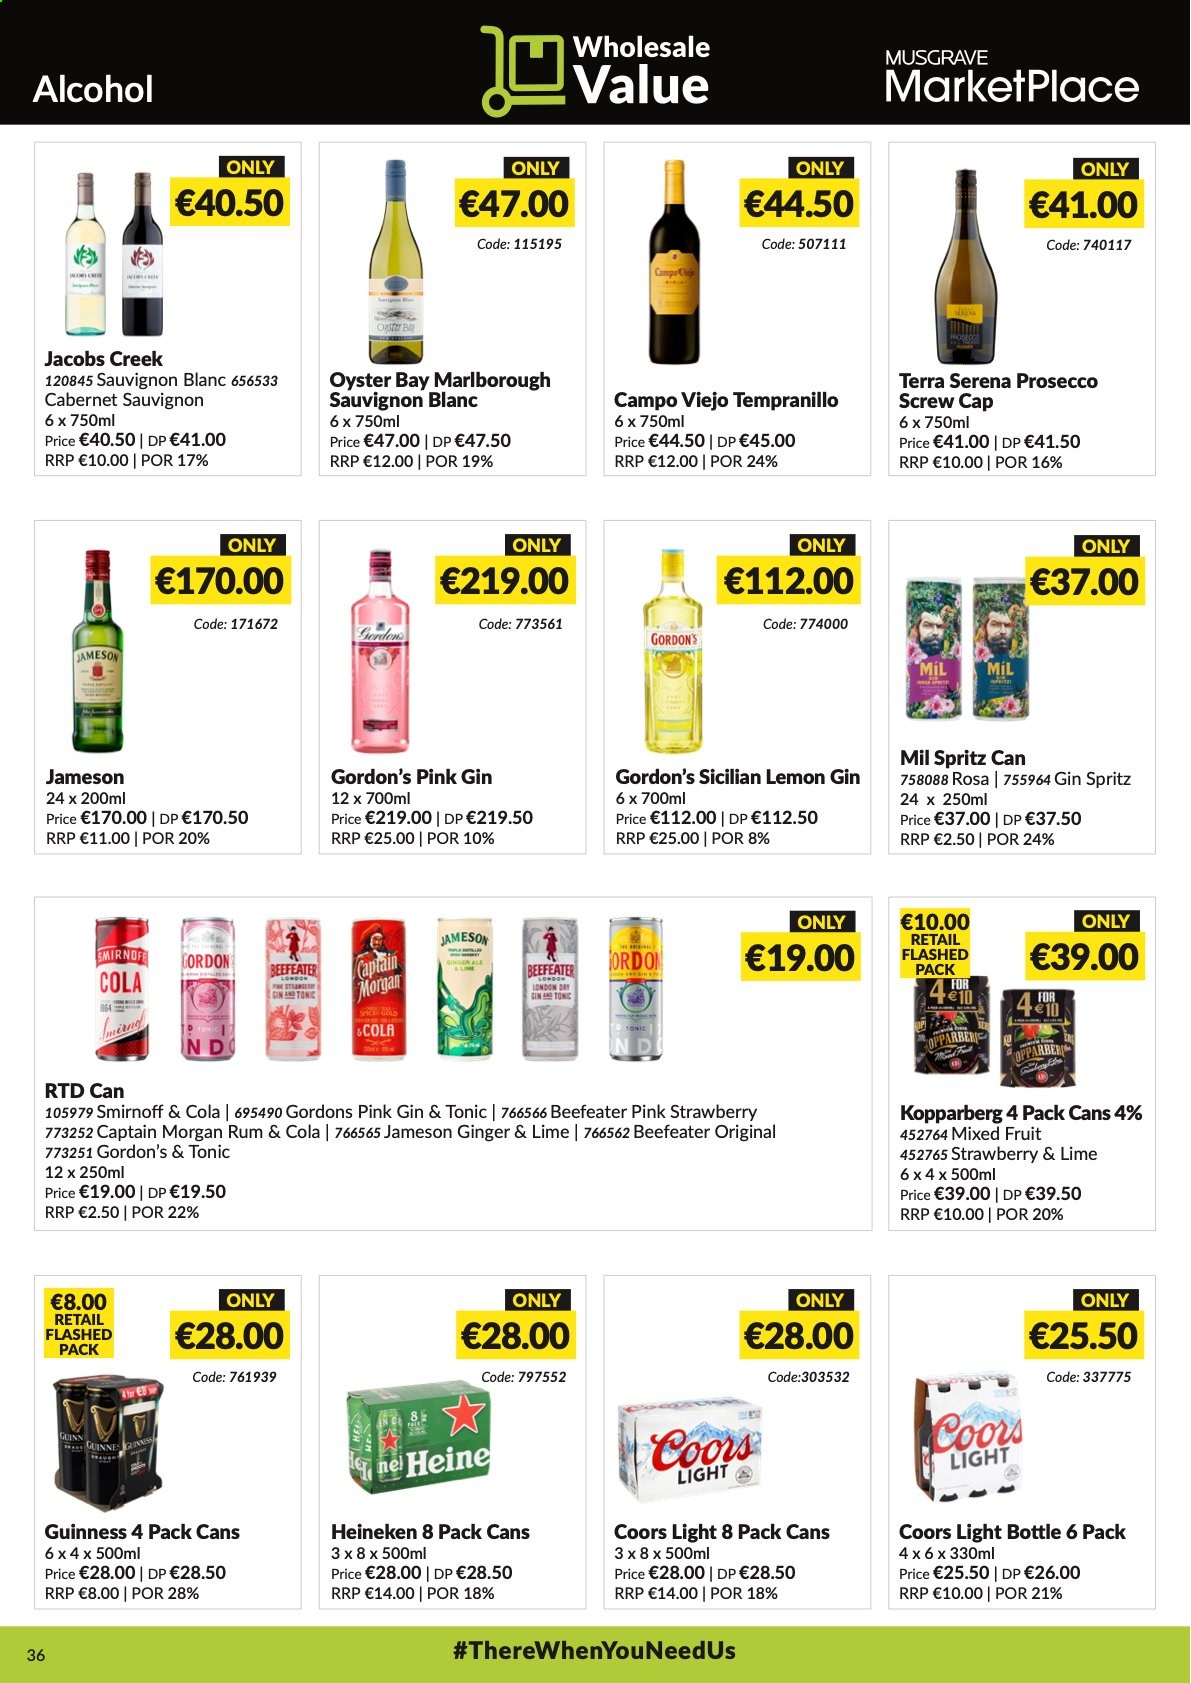 thumbnail - MUSGRAVE Market Place offer  - 09.05.2021 - 05.06.2021 - Sales products - Coors, oysters, Jacobs, Cabernet Sauvignon, red wine, white wine, prosecco, wine, Campo Viejo, alcohol, Tempranillo, Sauvignon Blanc, Captain Morgan, rum, Smirnoff, Jameson, Gordon's, Beefeater, Kopparberg, gin & tonic, beer, Heineken, Guinness. Page 36.